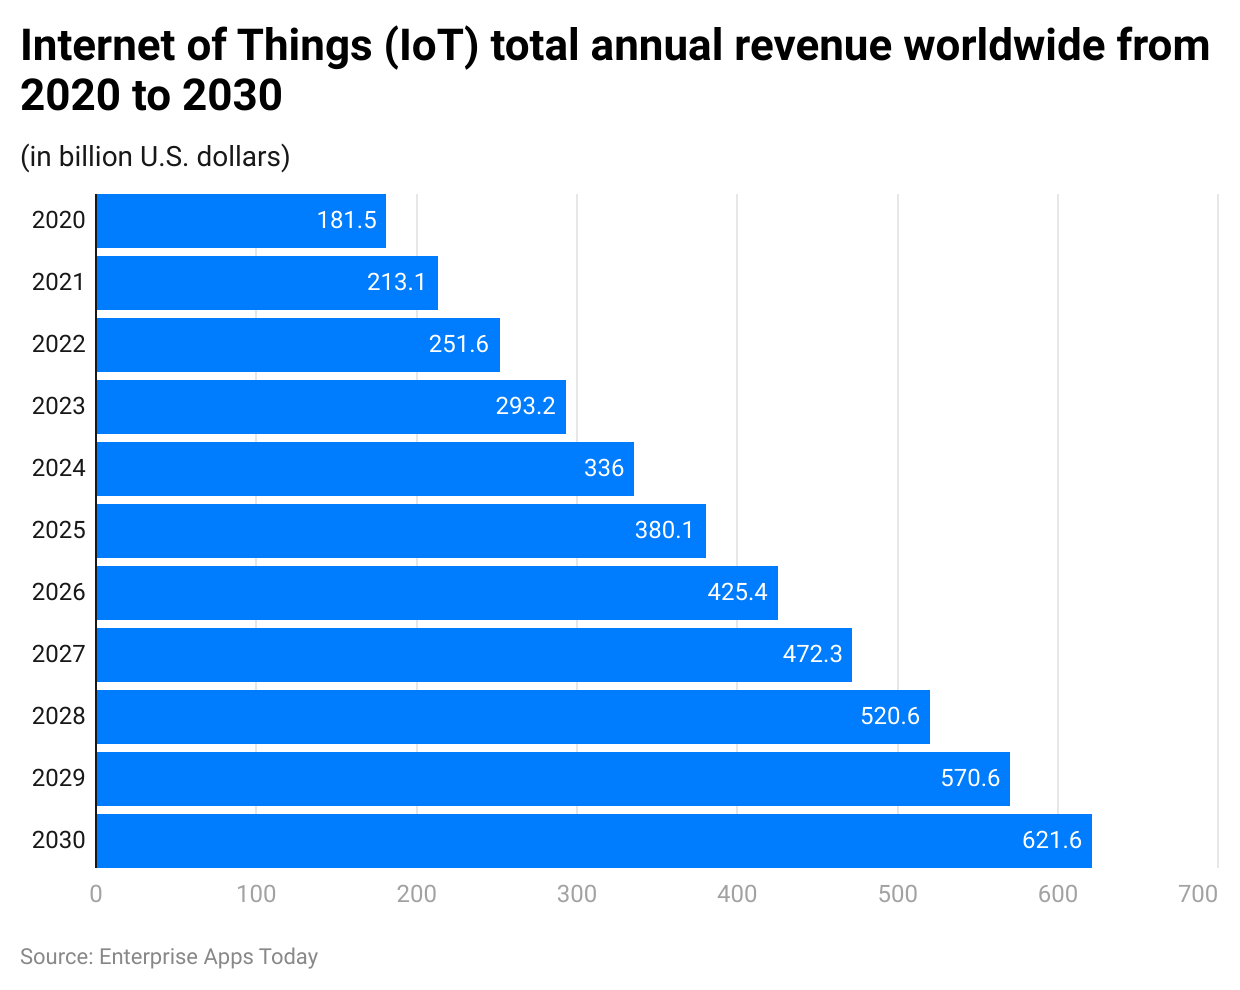 internet-of-things-iot-total-annual-revenue-worldwide-from-2020-to-2030.